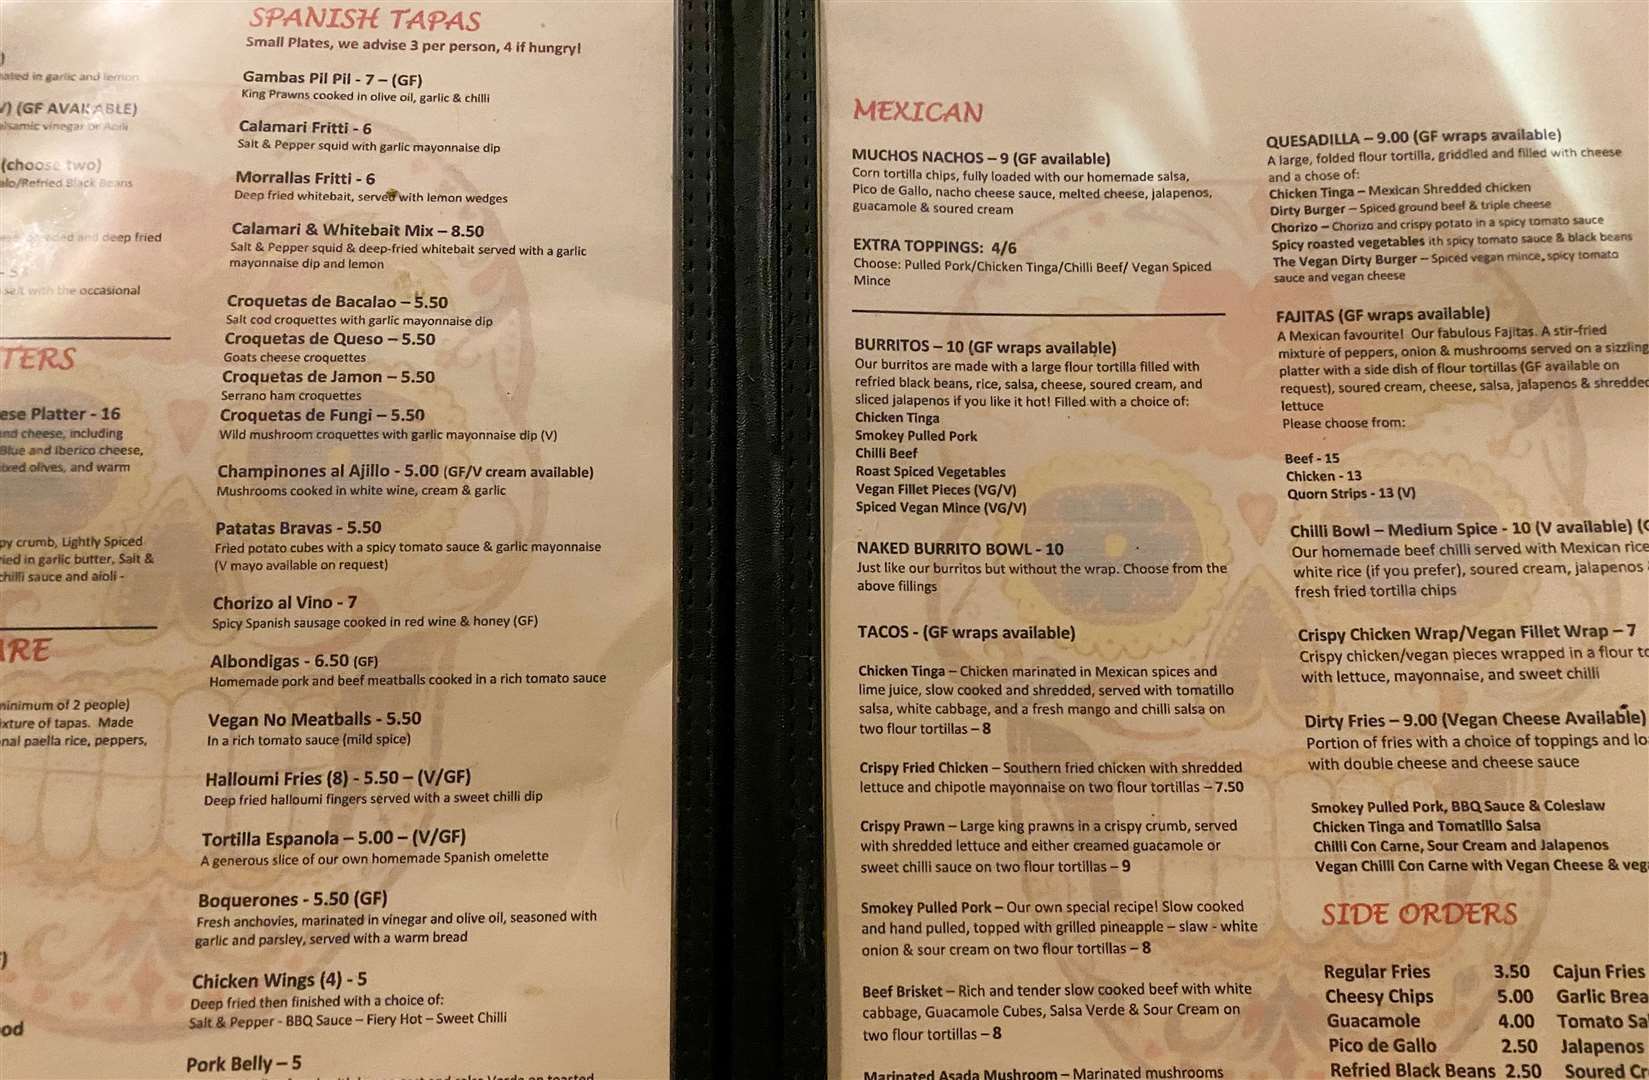 The menu has plenty of options, including vegetarian and vegan dishes